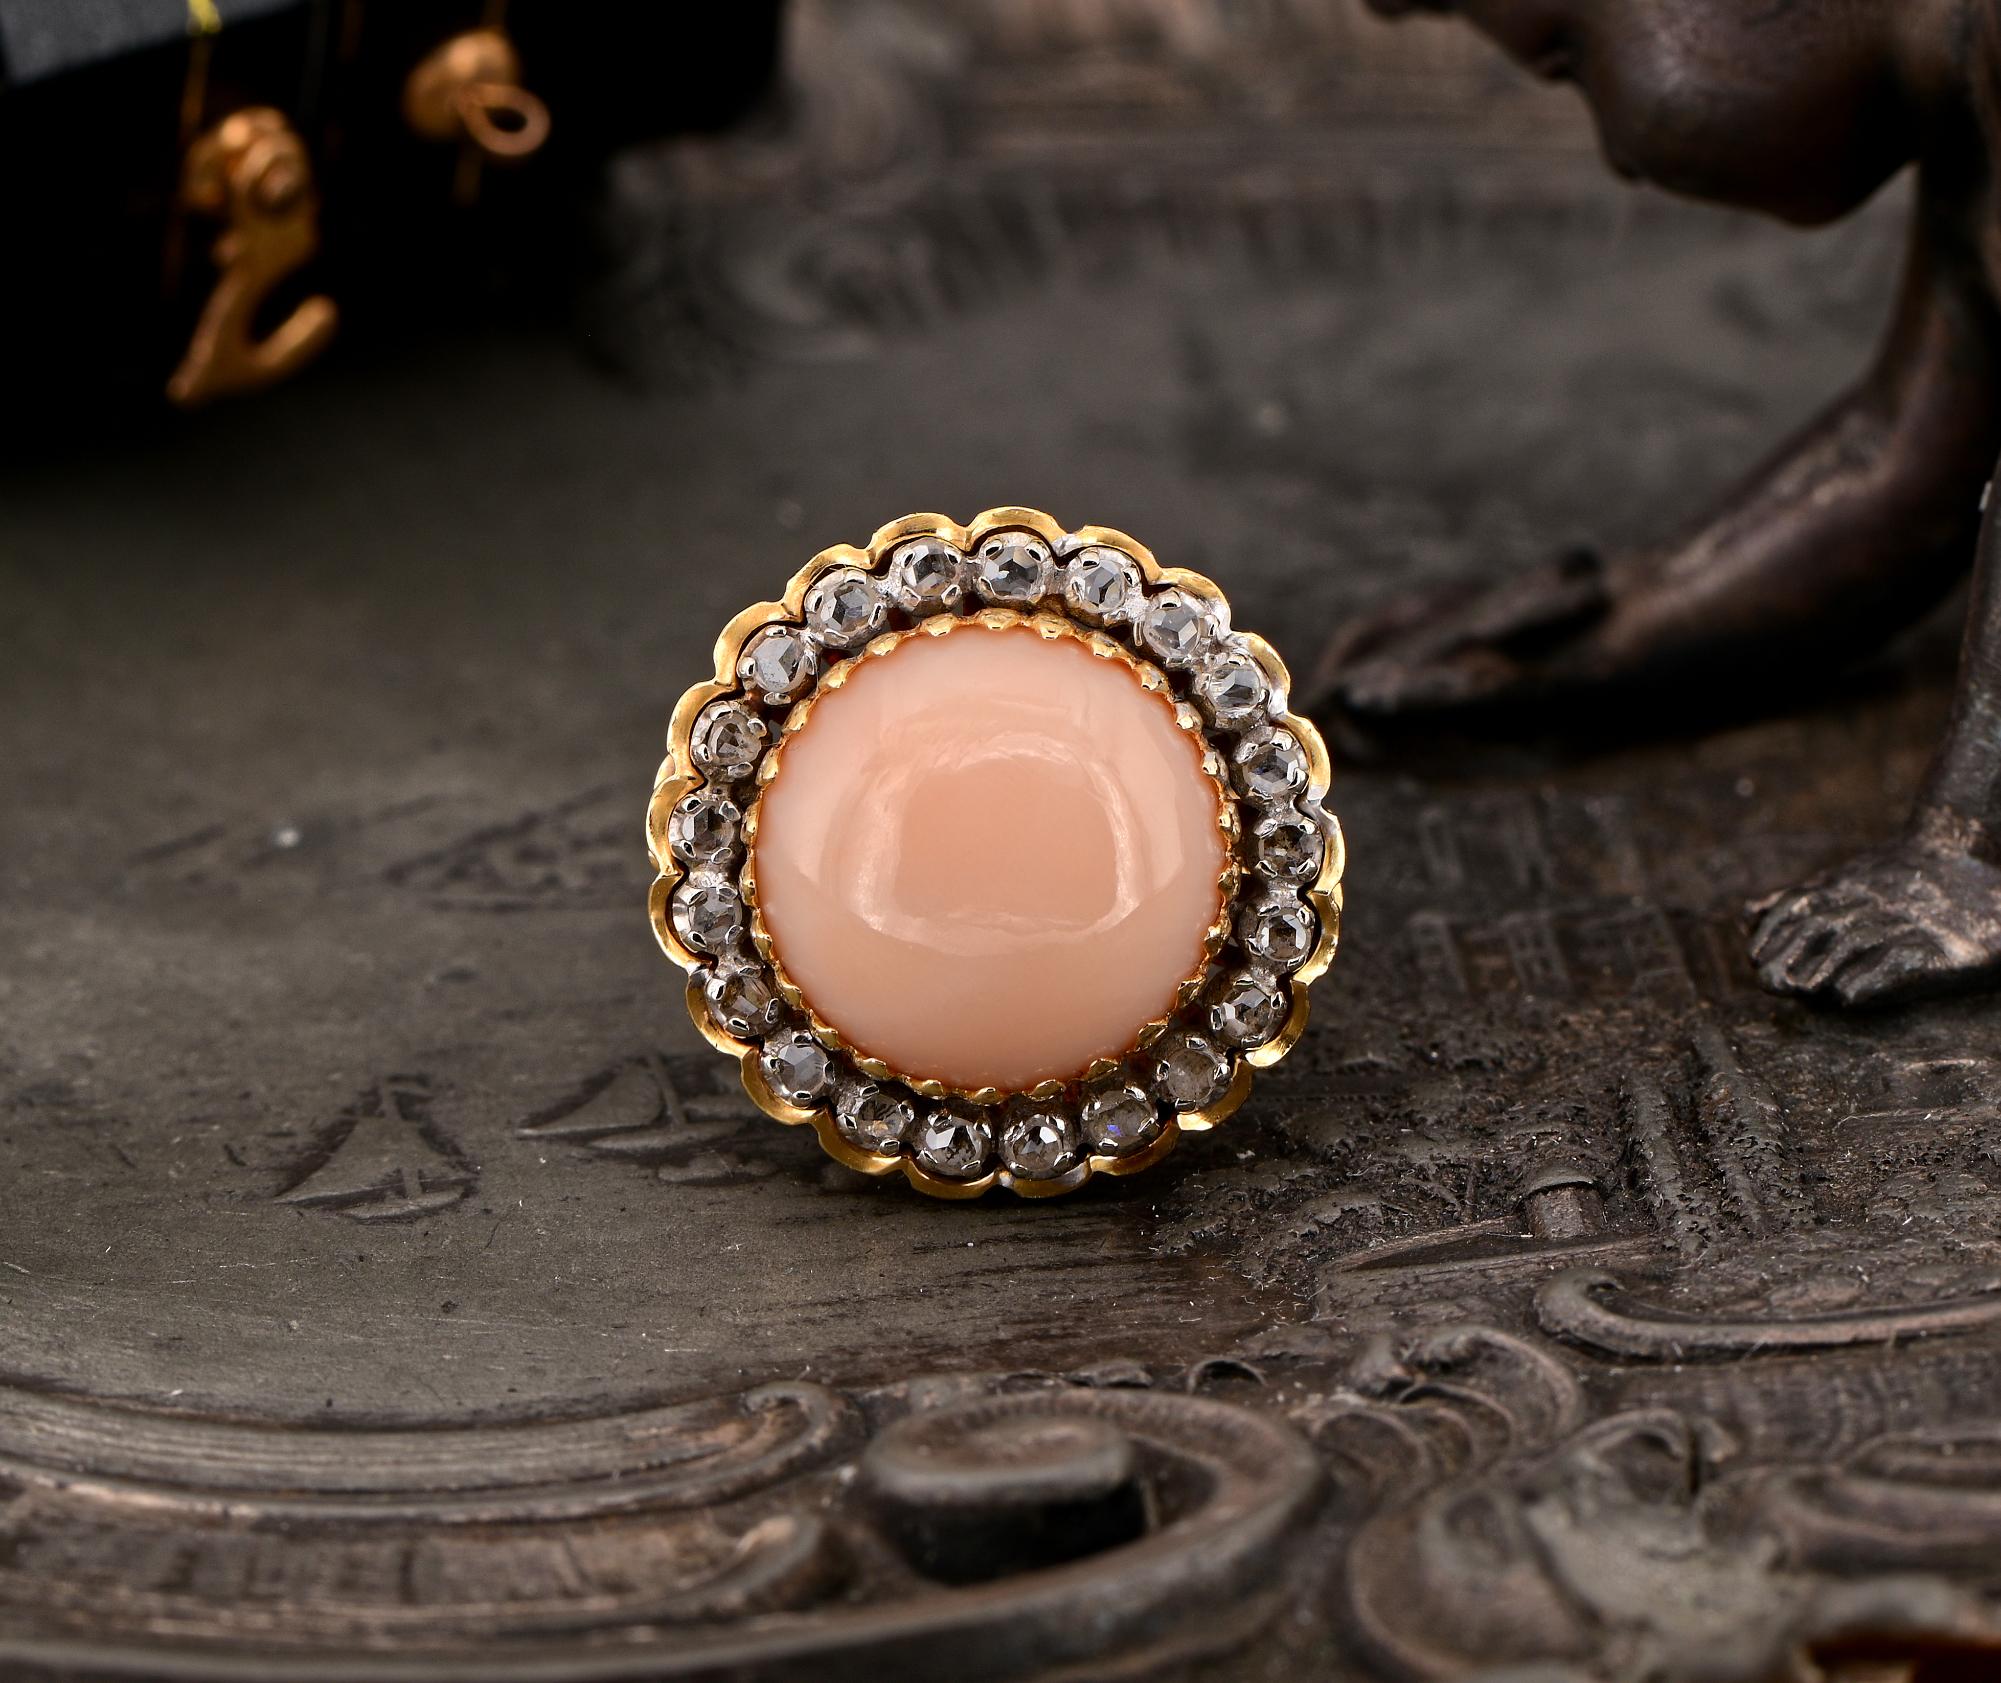 This outstanding vintage ring is 1940 ca, Italian origin
Totally hand crafted of solid 18 KT bi-color gold, bears Italian assay mark and maker number of the period
It prizes fine workmanship, over-cared in every side- with back caged work and heart